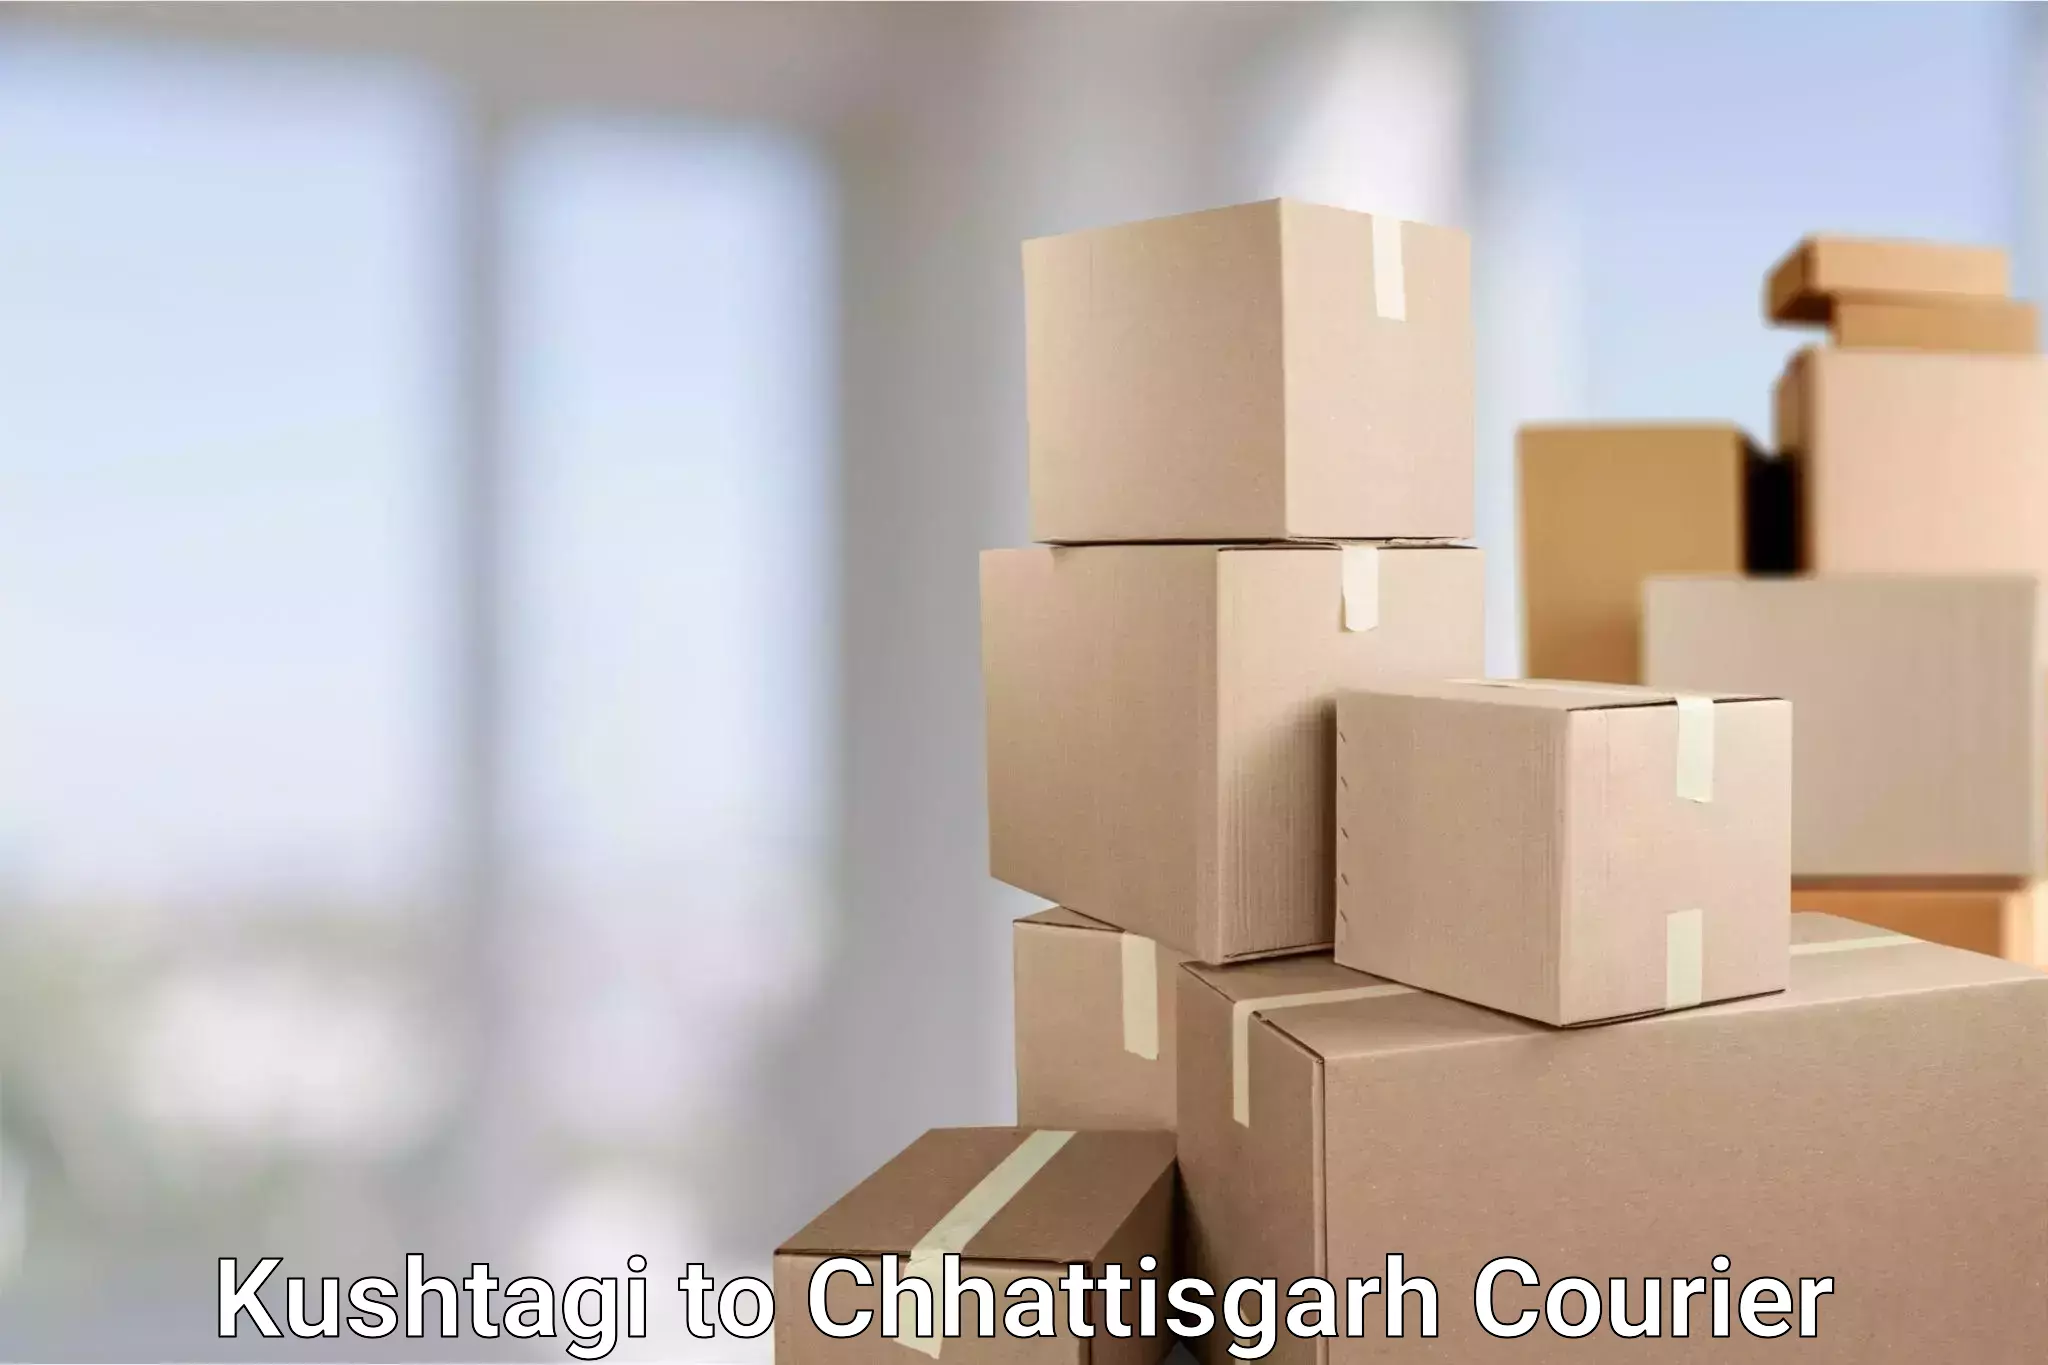 Package delivery network Kushtagi to Khairagarh